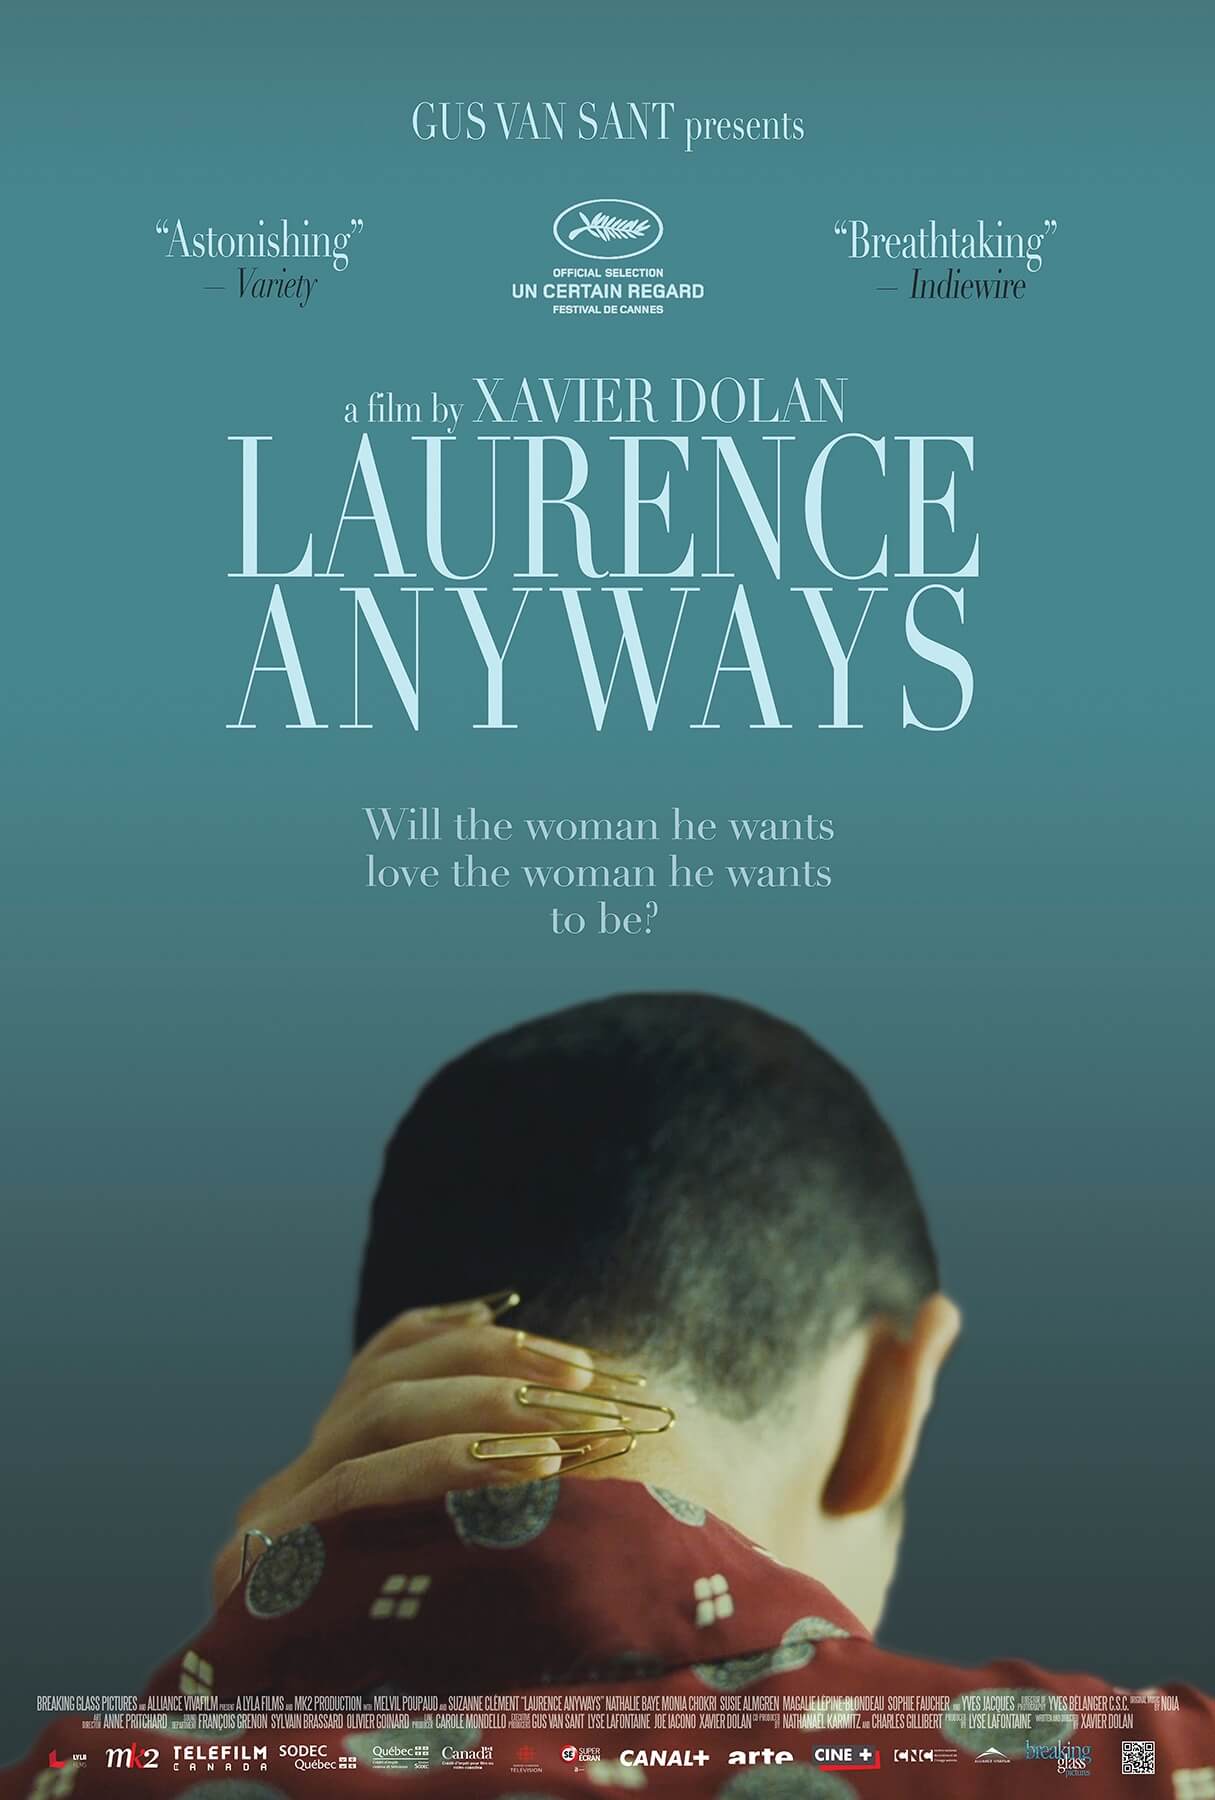 Laurence Anyways, il capolavoro di Xavier Dolan 10 anni fa Queer Palm al Festival di Cannes - Laurence Anyways poster - Gay.it